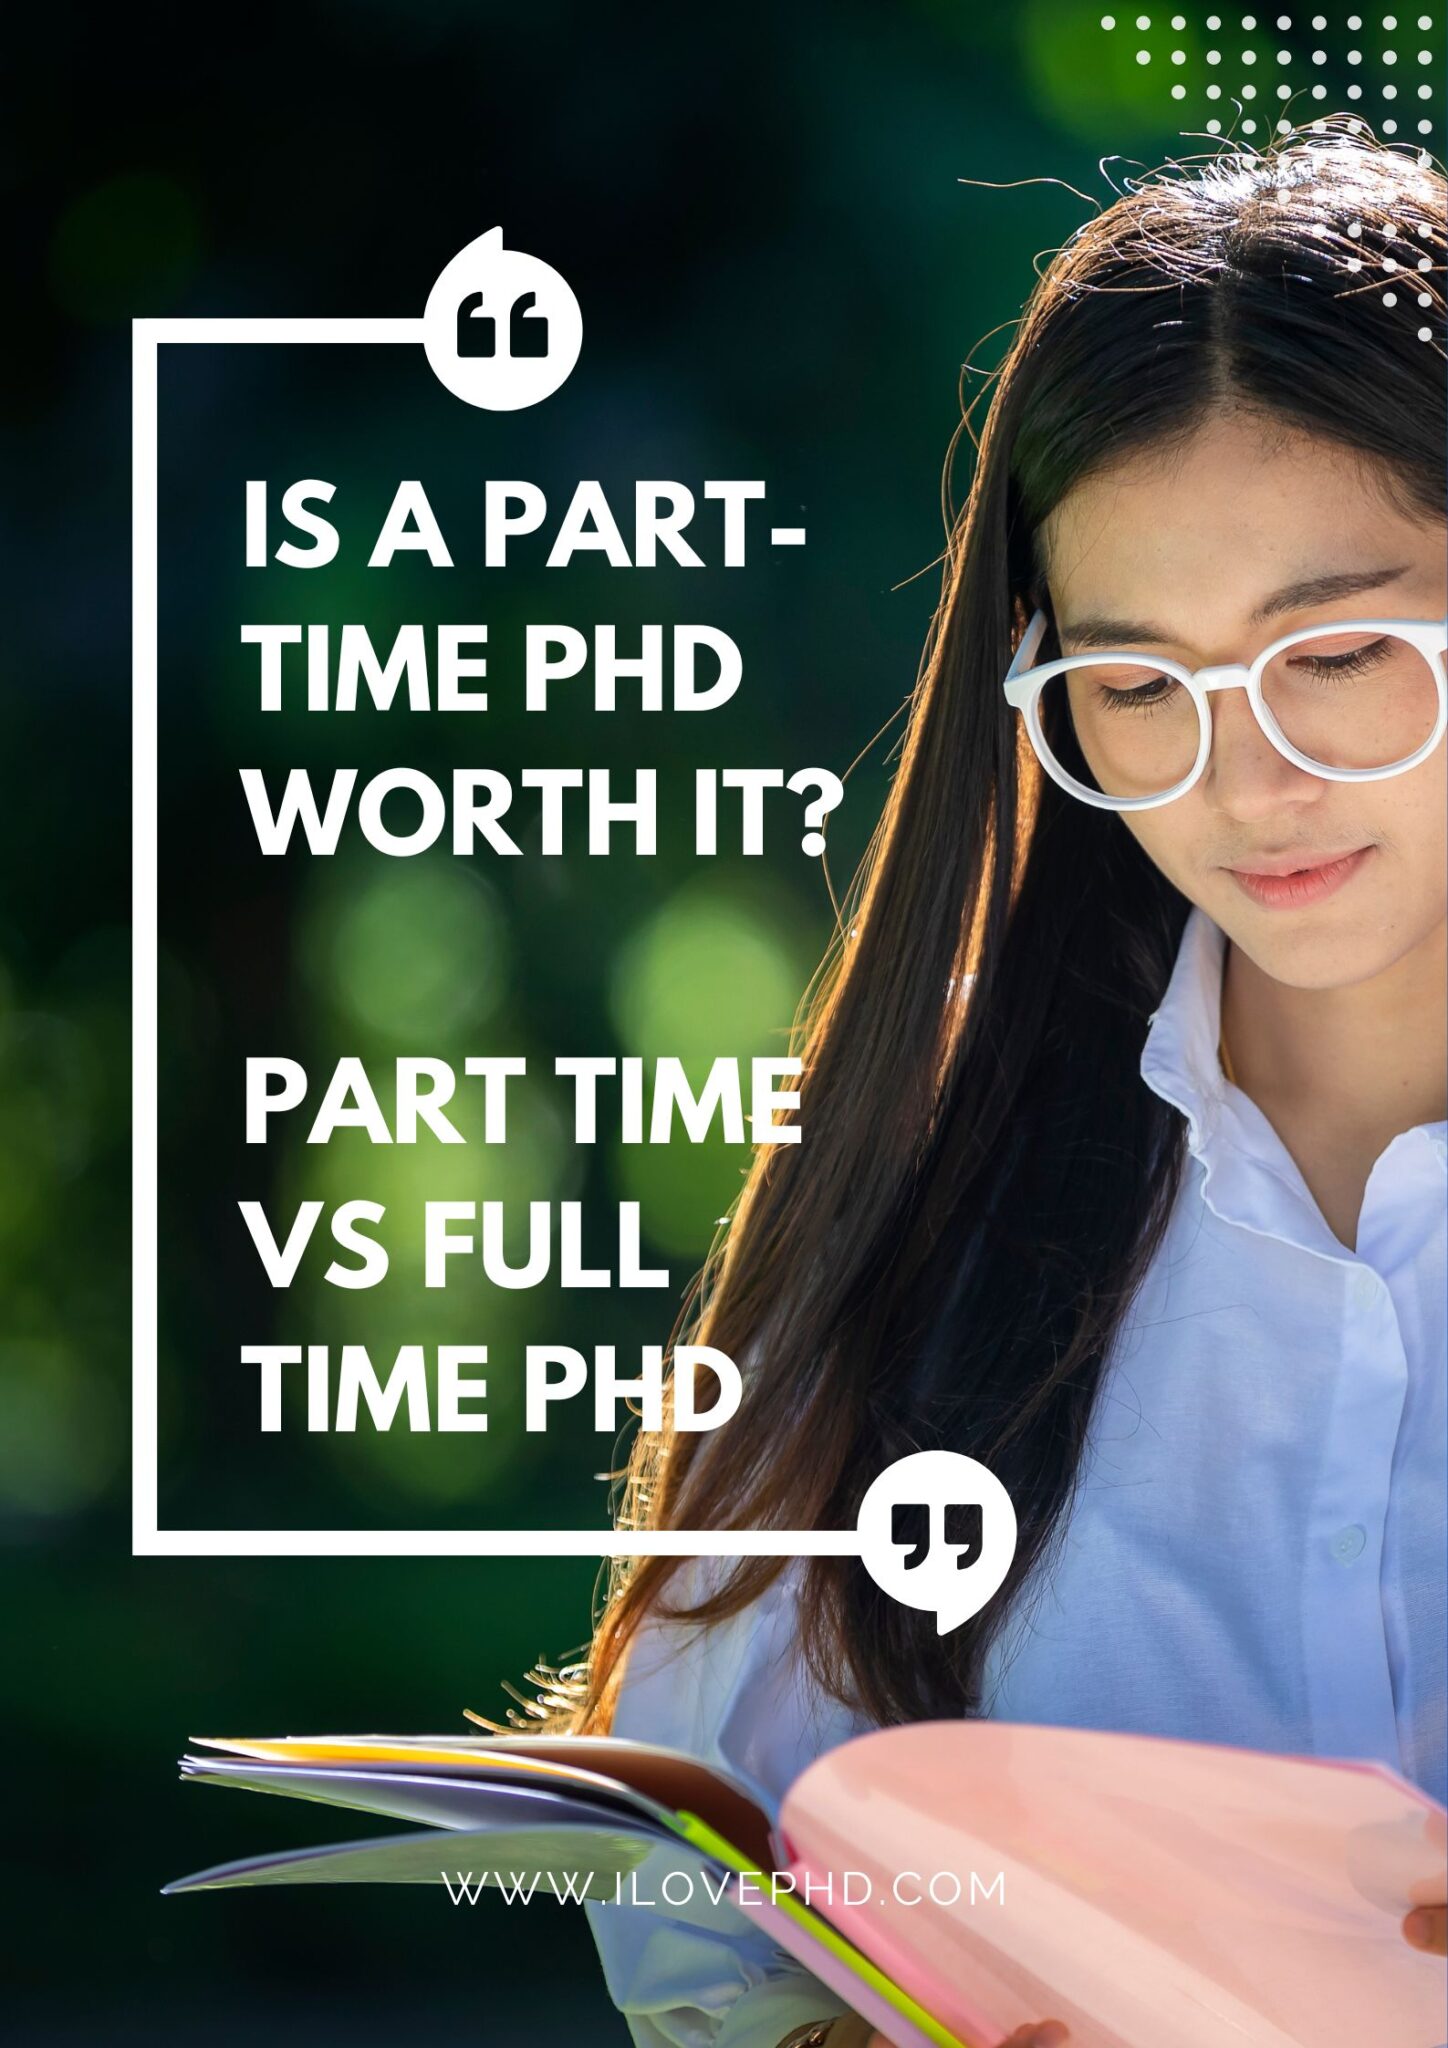 phd worth it or not